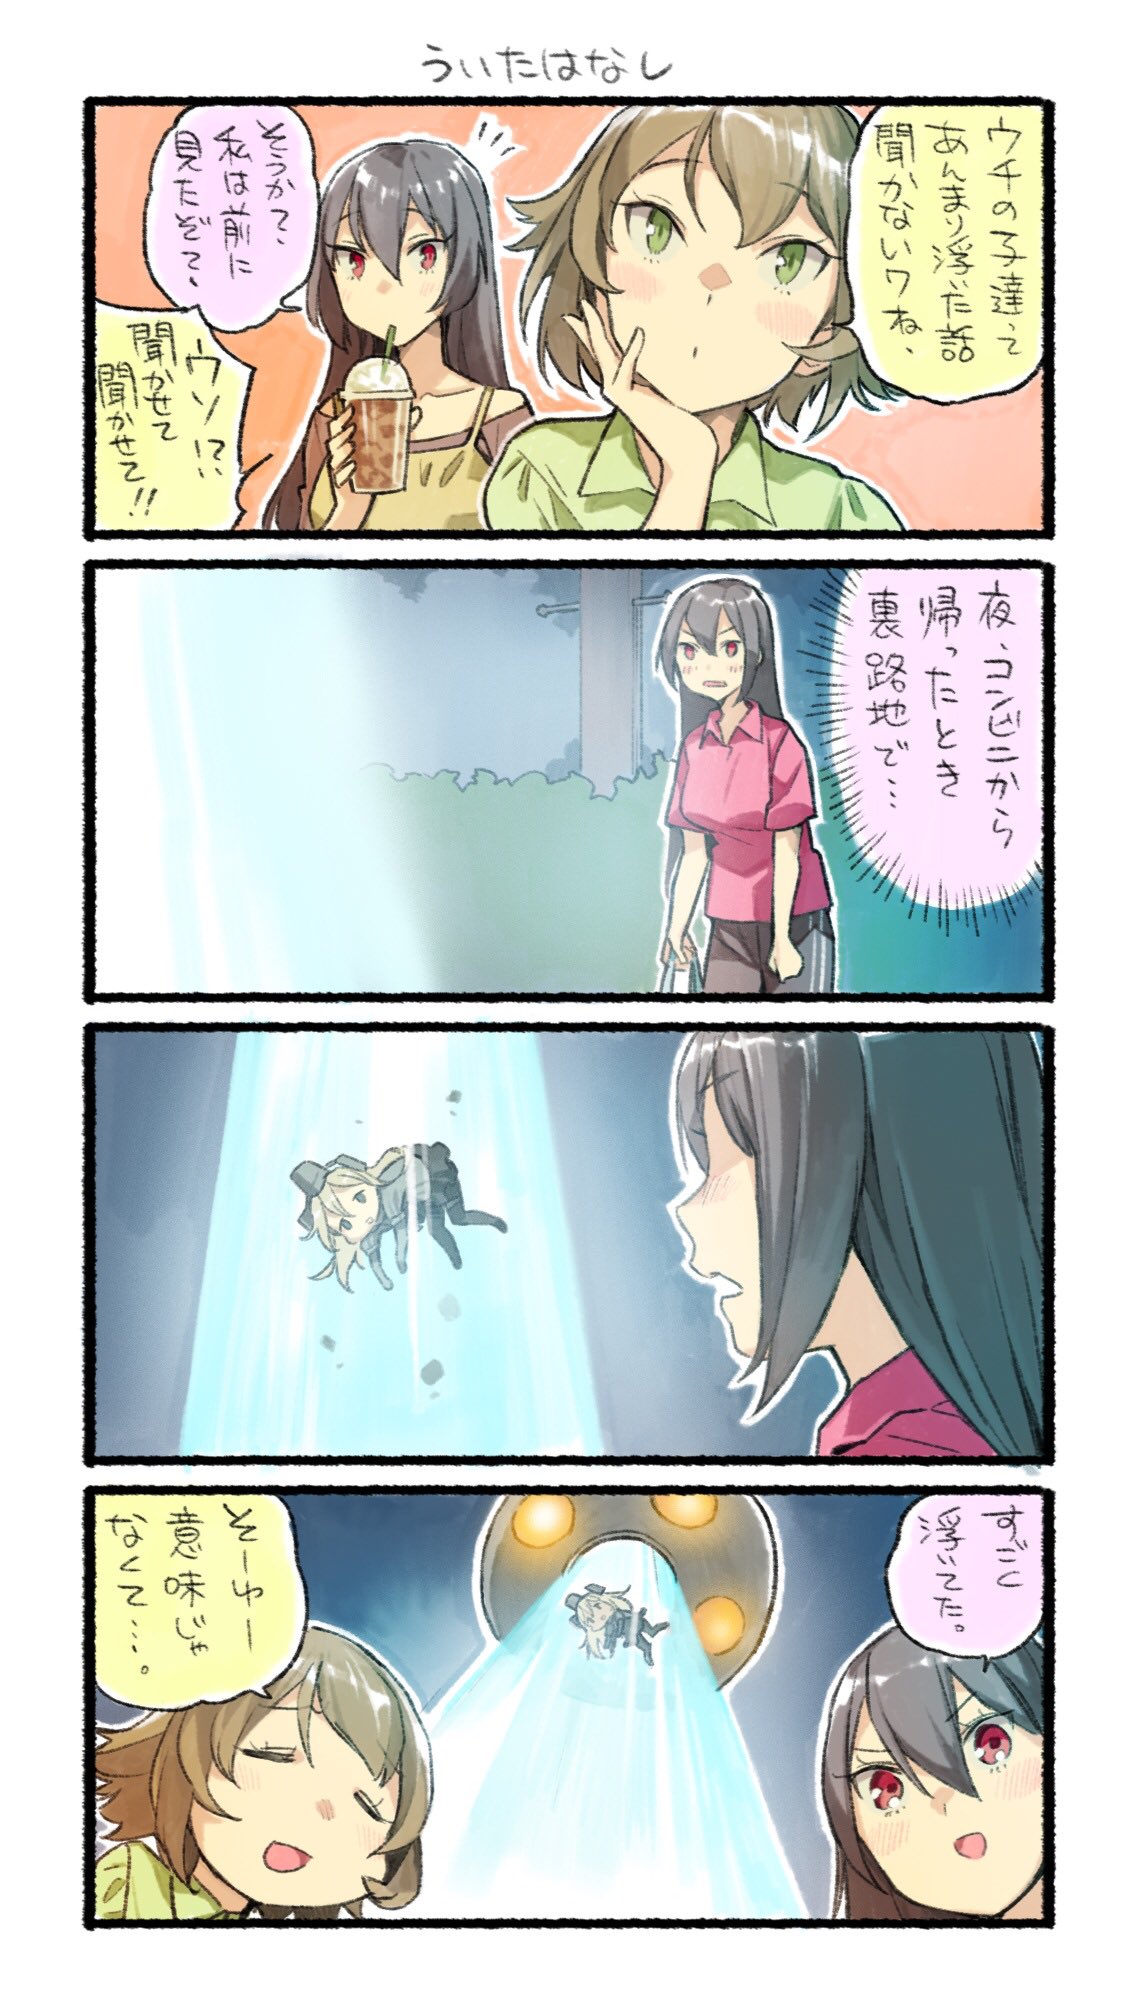 3girls 4koma abduction alternate_costume black_hair blush brown_hair closed_eyes comic commentary_request drinking green_eyes highres kantai_collection long_hair multiple_girls mutsu_(kantai_collection) nagato_(kantai_collection) night nonco open_mouth outdoors red_eyes short_hair smile translation_request u-511_(kantai_collection) ufo